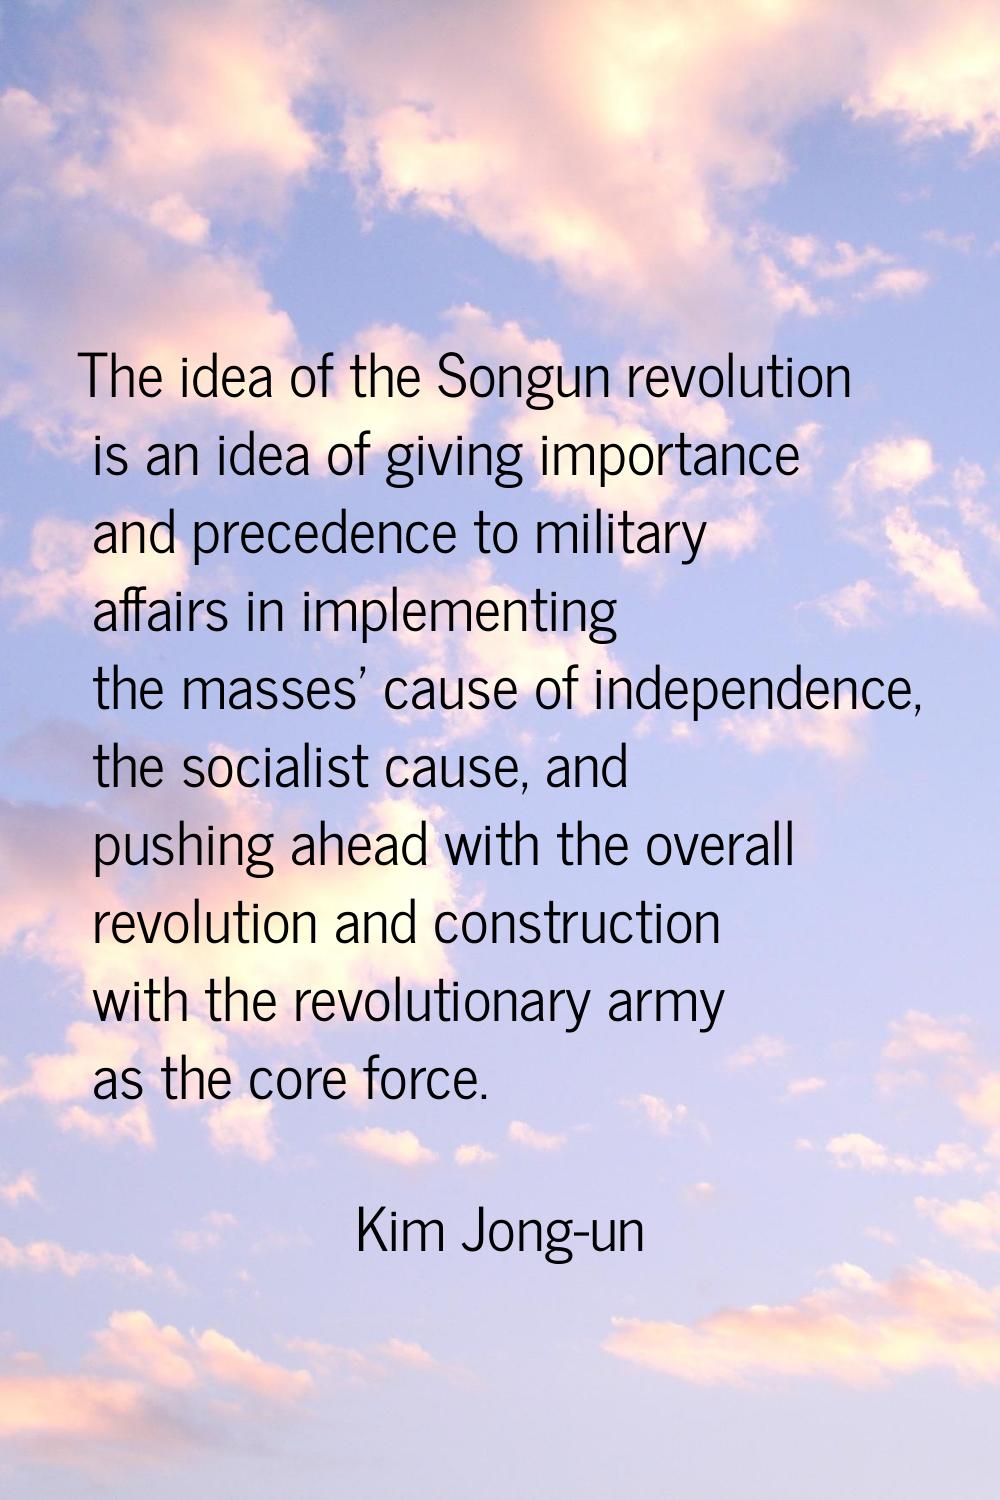 The idea of the Songun revolution is an idea of giving importance and precedence to military affair